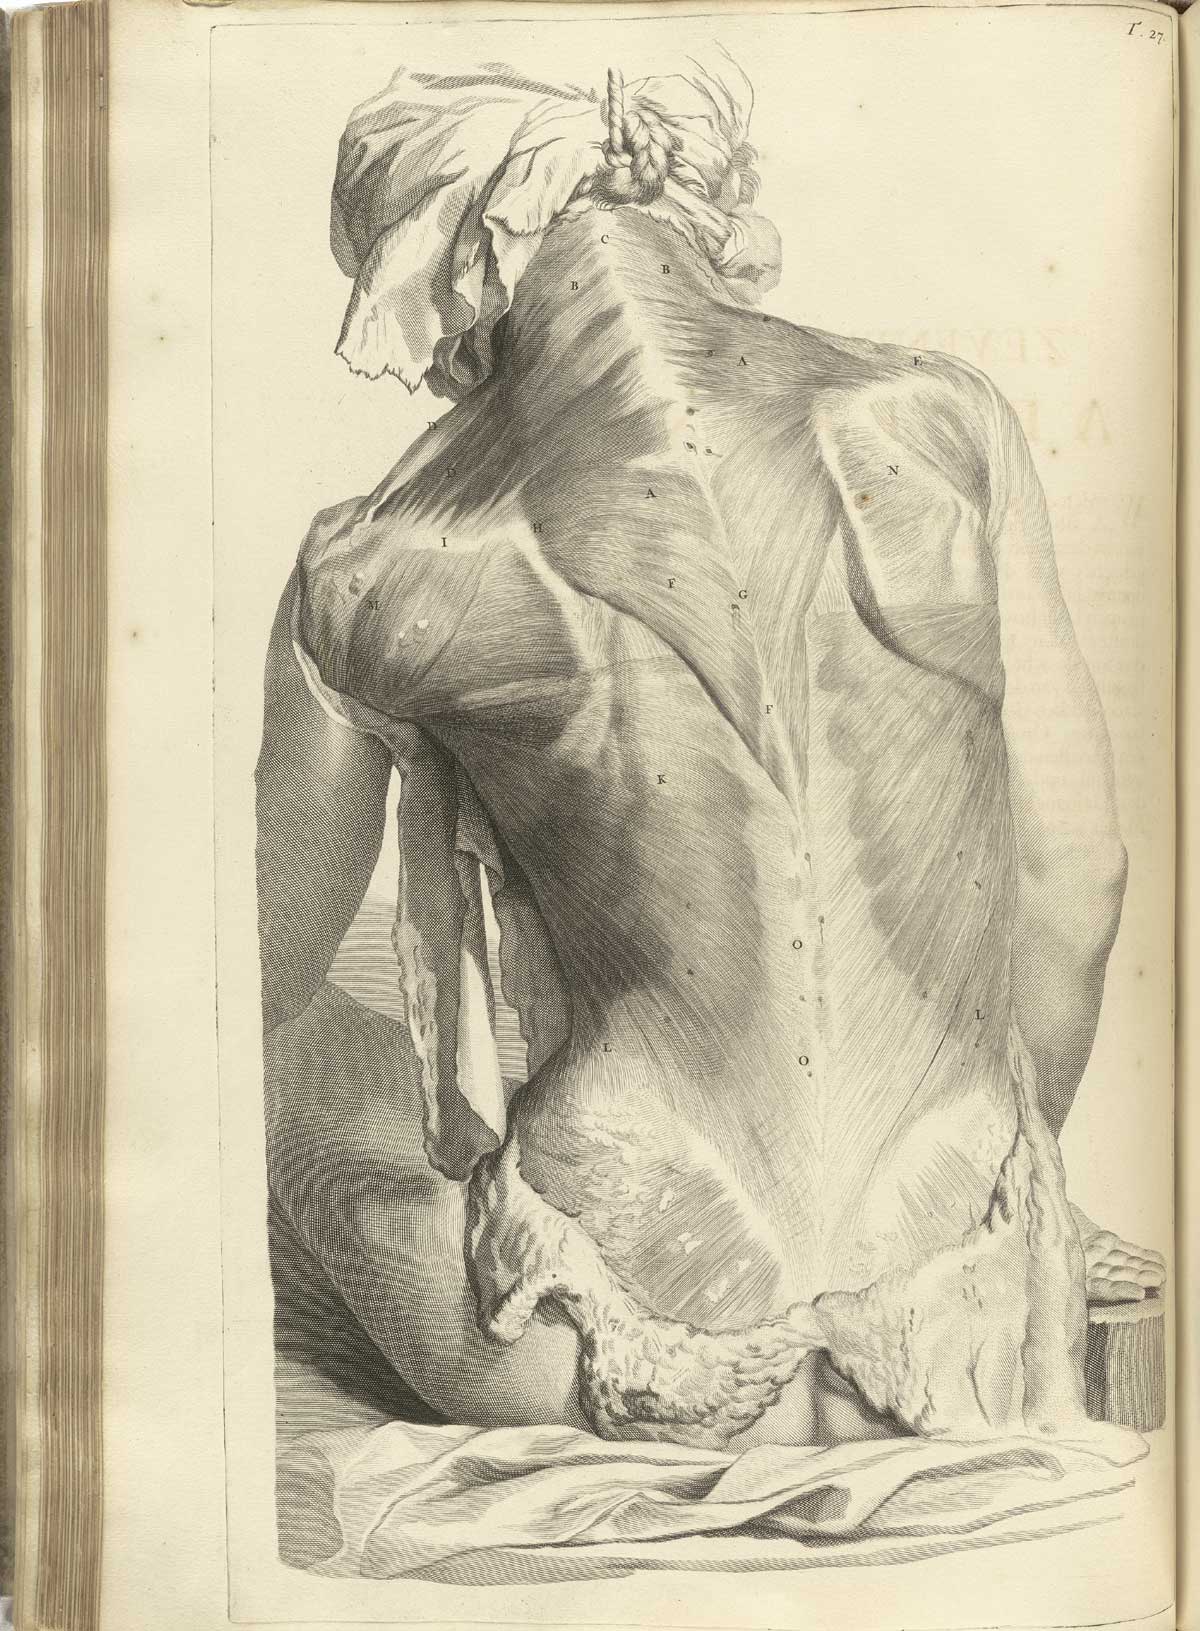 Engraving showing detail of the exposed muscles of the back with skin peeled away; the back is that of a female cadaver with kerchief sitting upright on the dissection table with a noose holding the body up by the neck; from Govard Bidloo’s Ontleding Des Menschelyken Lichaams, Amsterdam, 1690, NLM Call no. WZ 250 B5855anDu 1690.